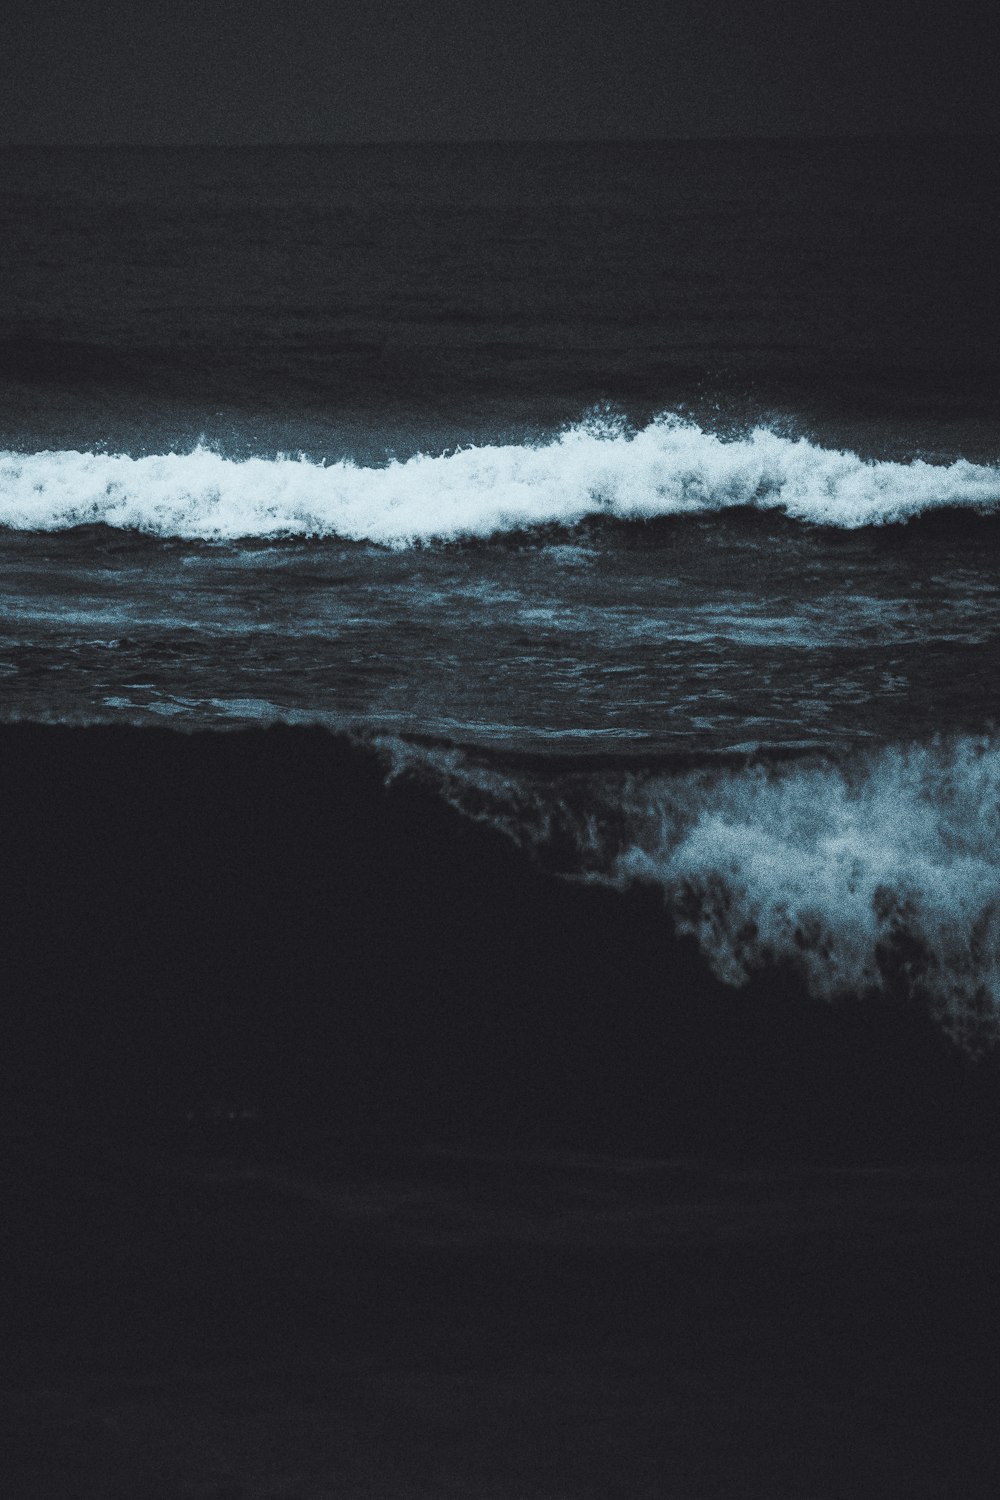 a black and white photo of a wave in the ocean